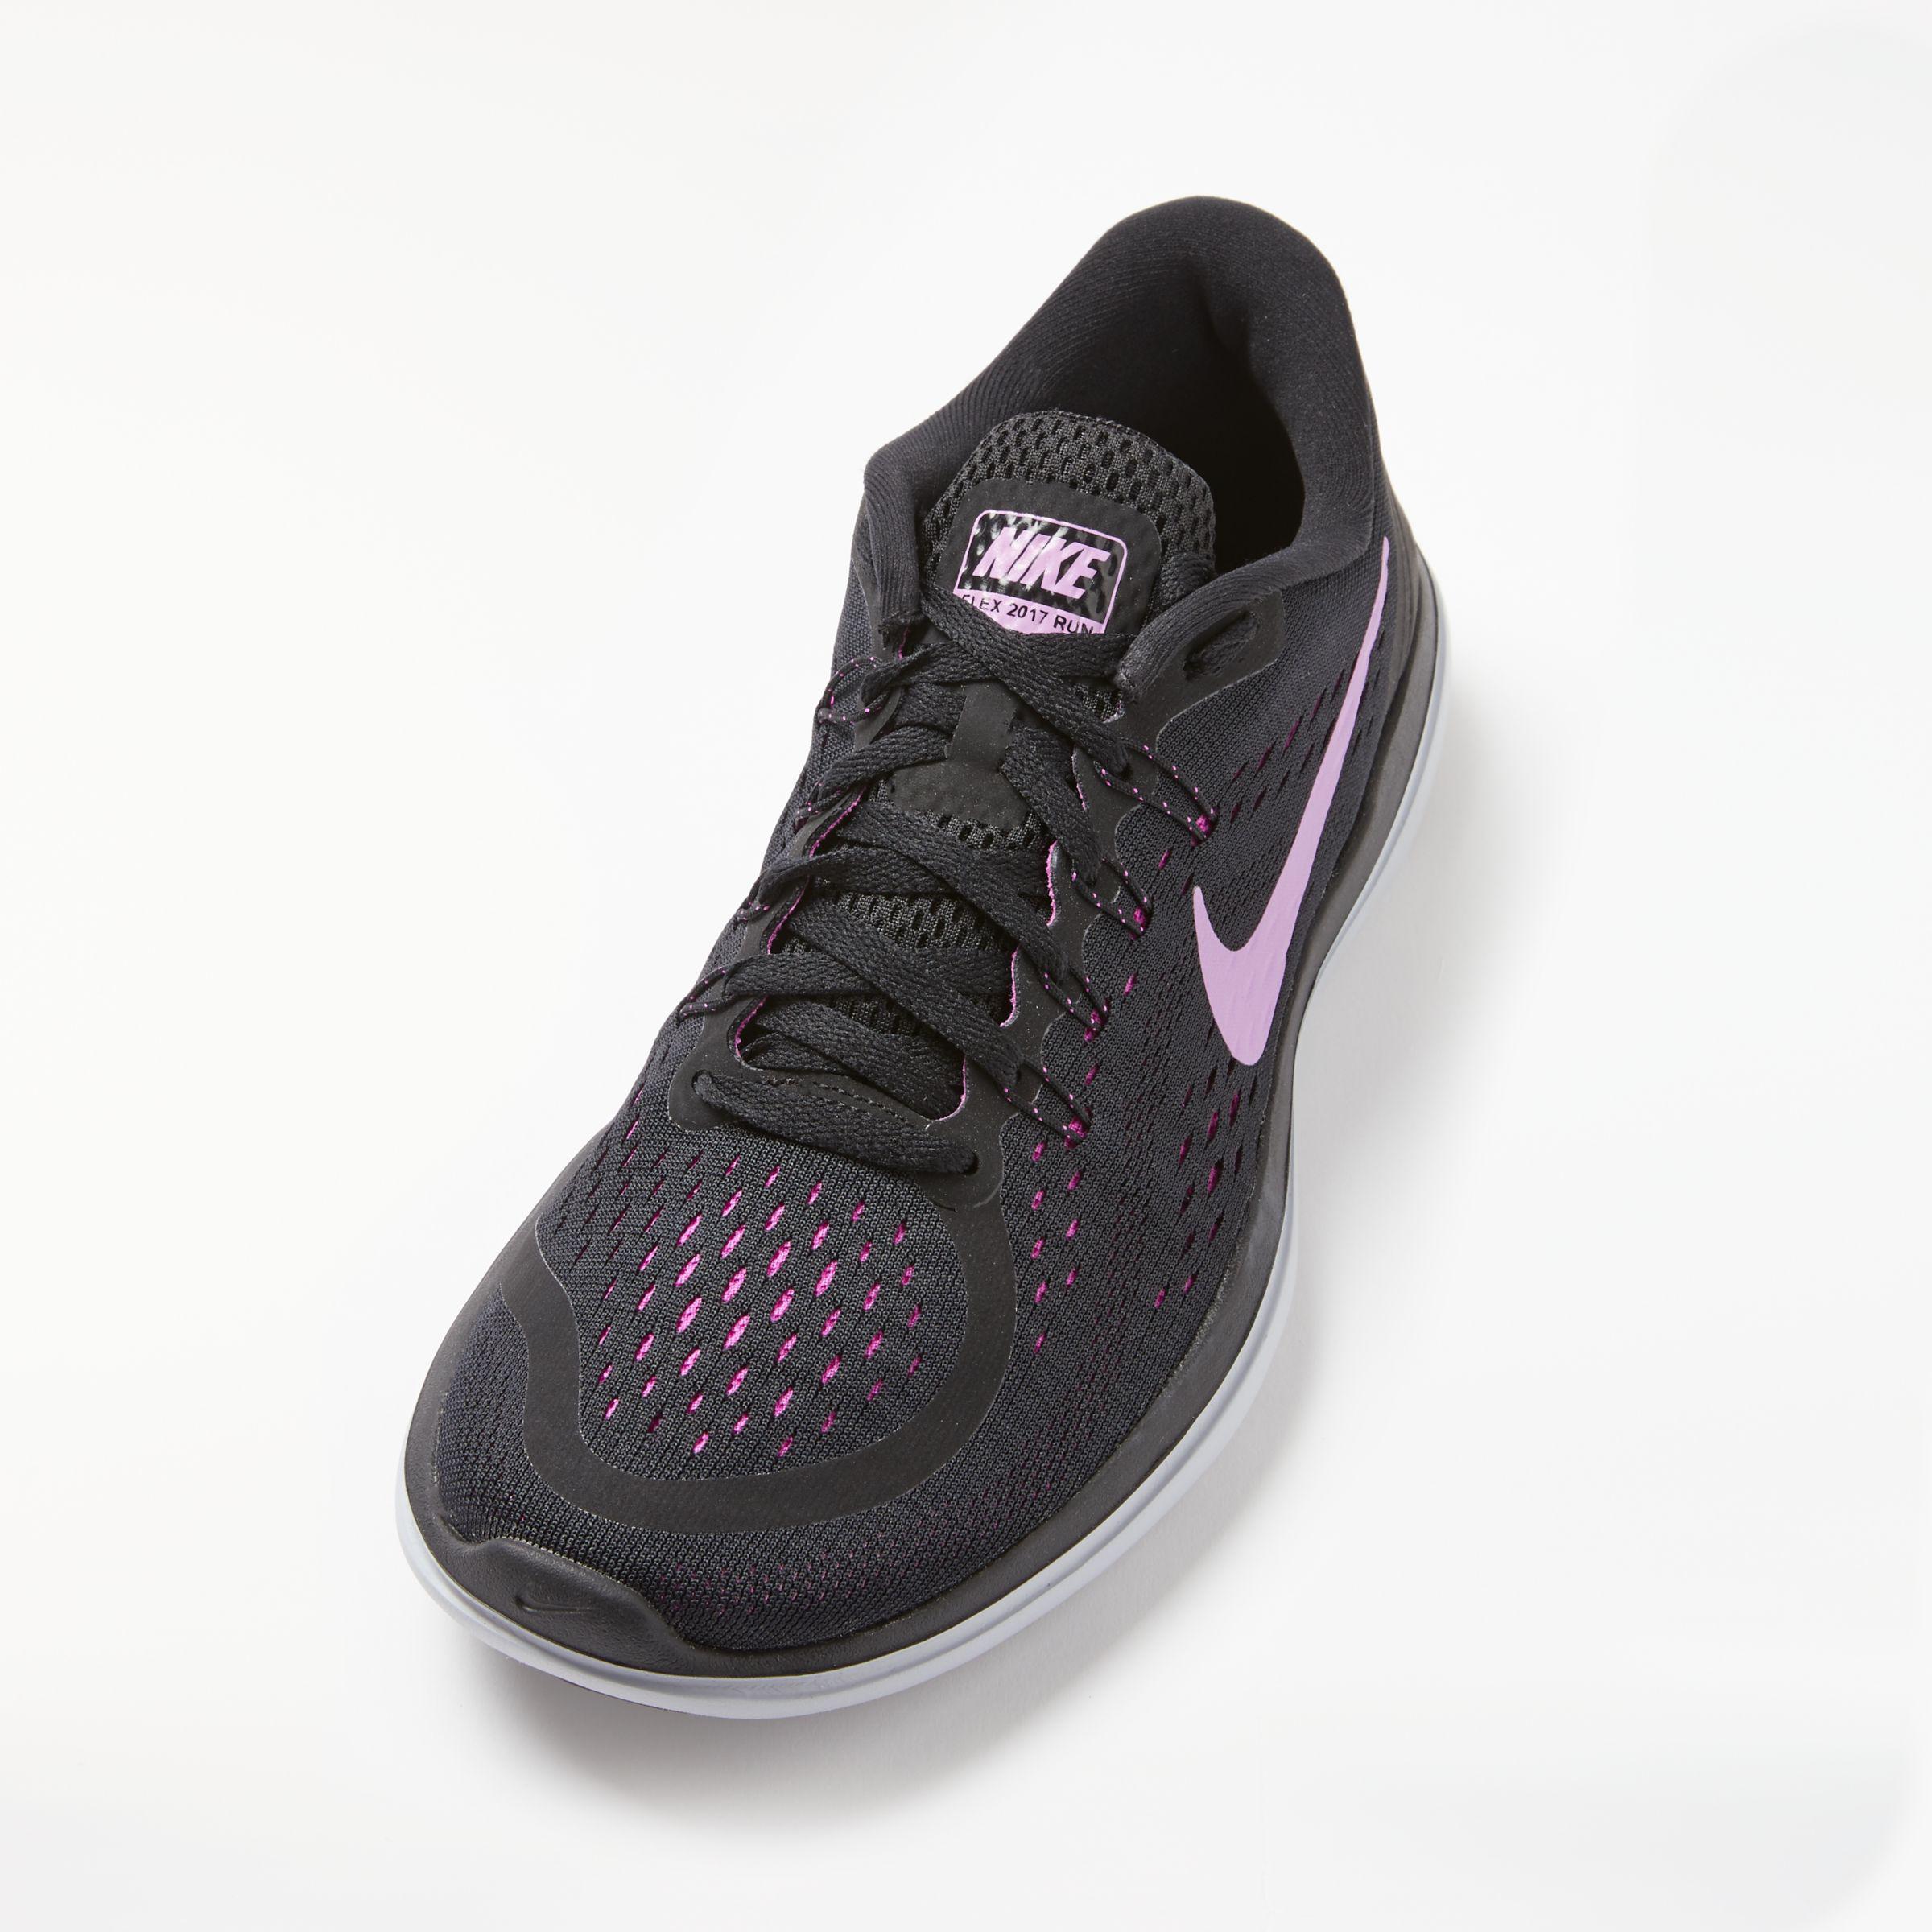 Nike Synthetic Flex 2017 Rn Women's Running Shoes in Black/Pink (Black) -  Lyst